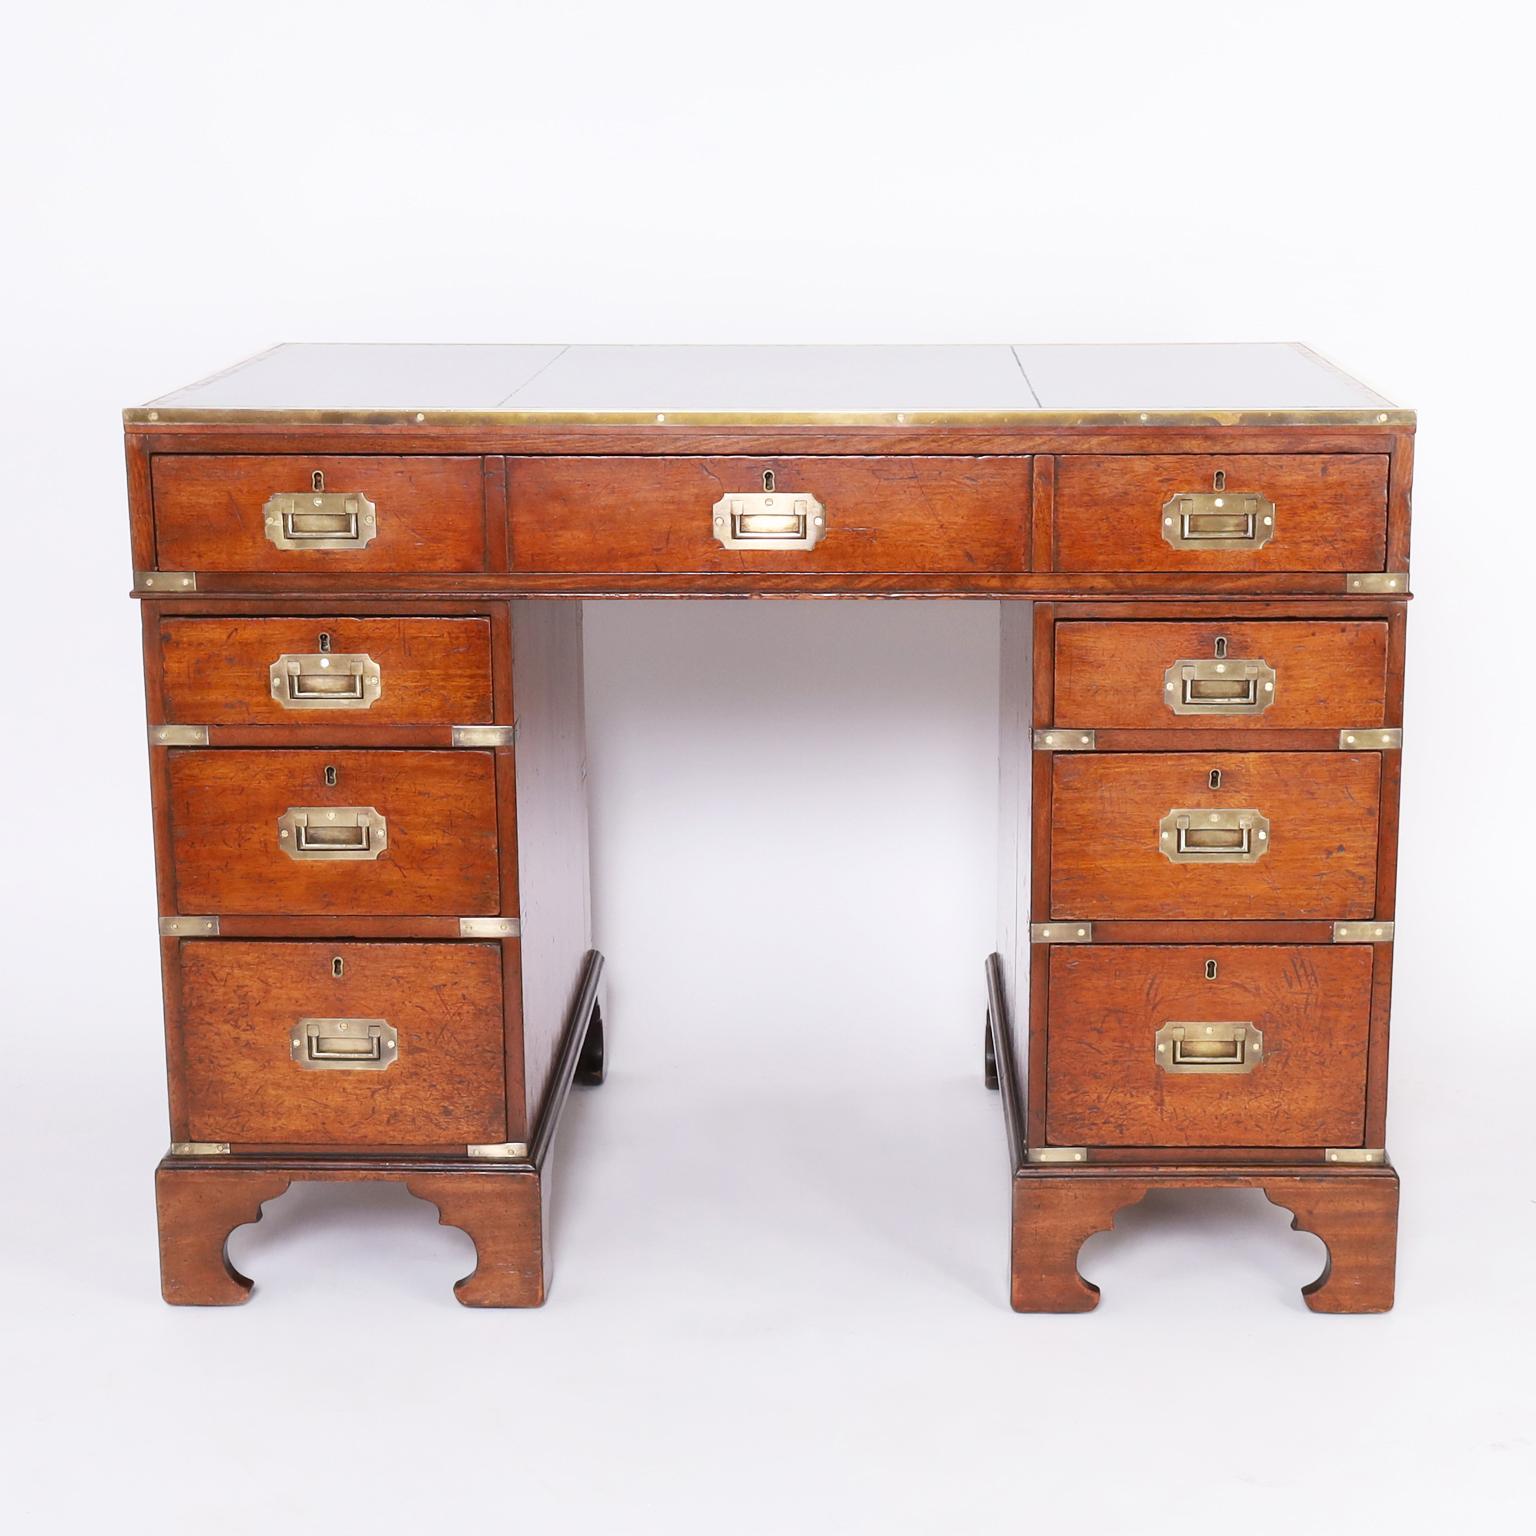 Handsome 19th century English desk handcrafted in mahogany with a tooled leather top, three piece campaign construction, brass hardware, and classic bracket feet. 

Kneehole measures 24.5